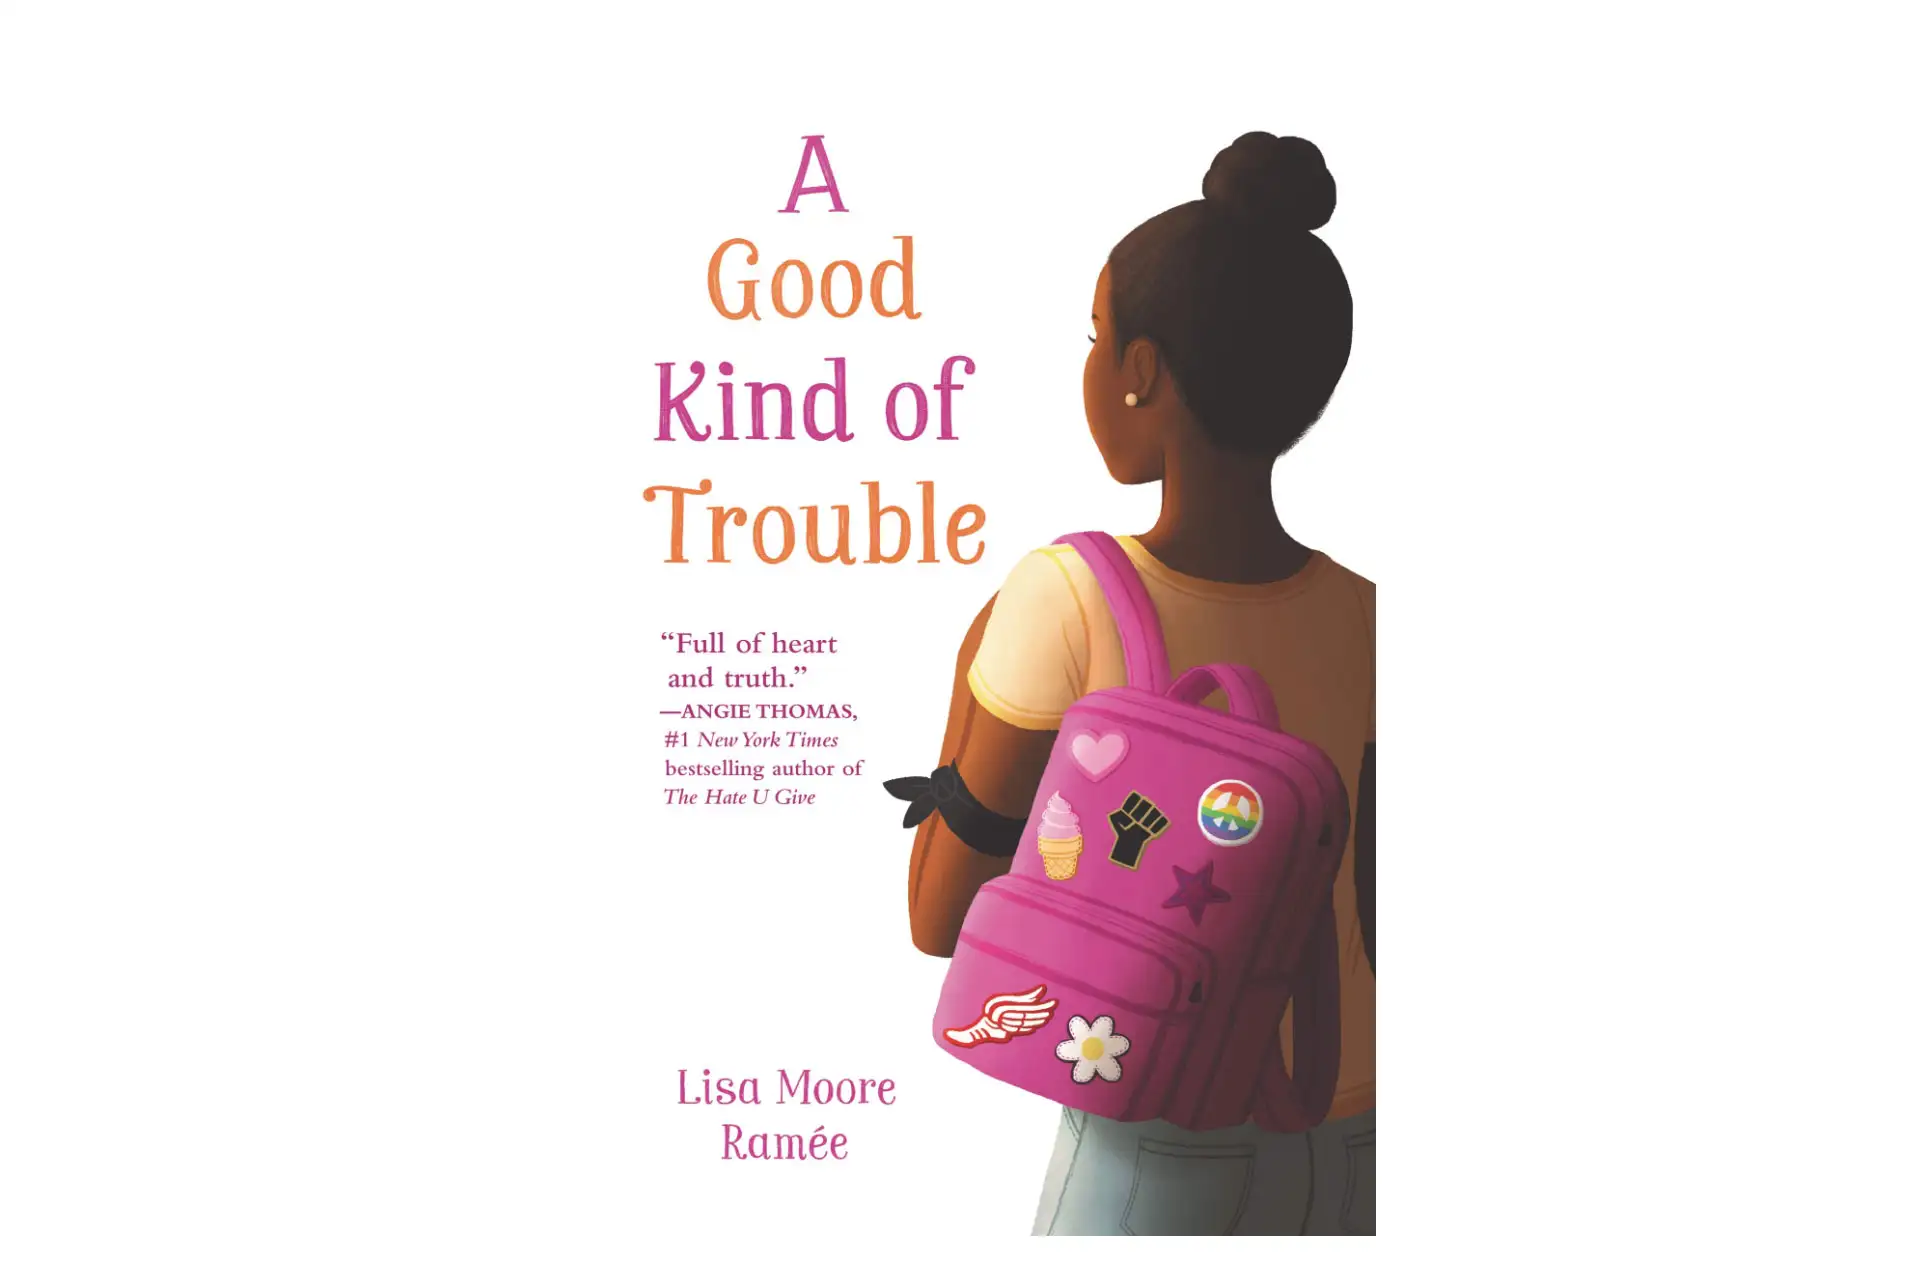 A Good Kind of Trouble Book; Courtesy of Amazon